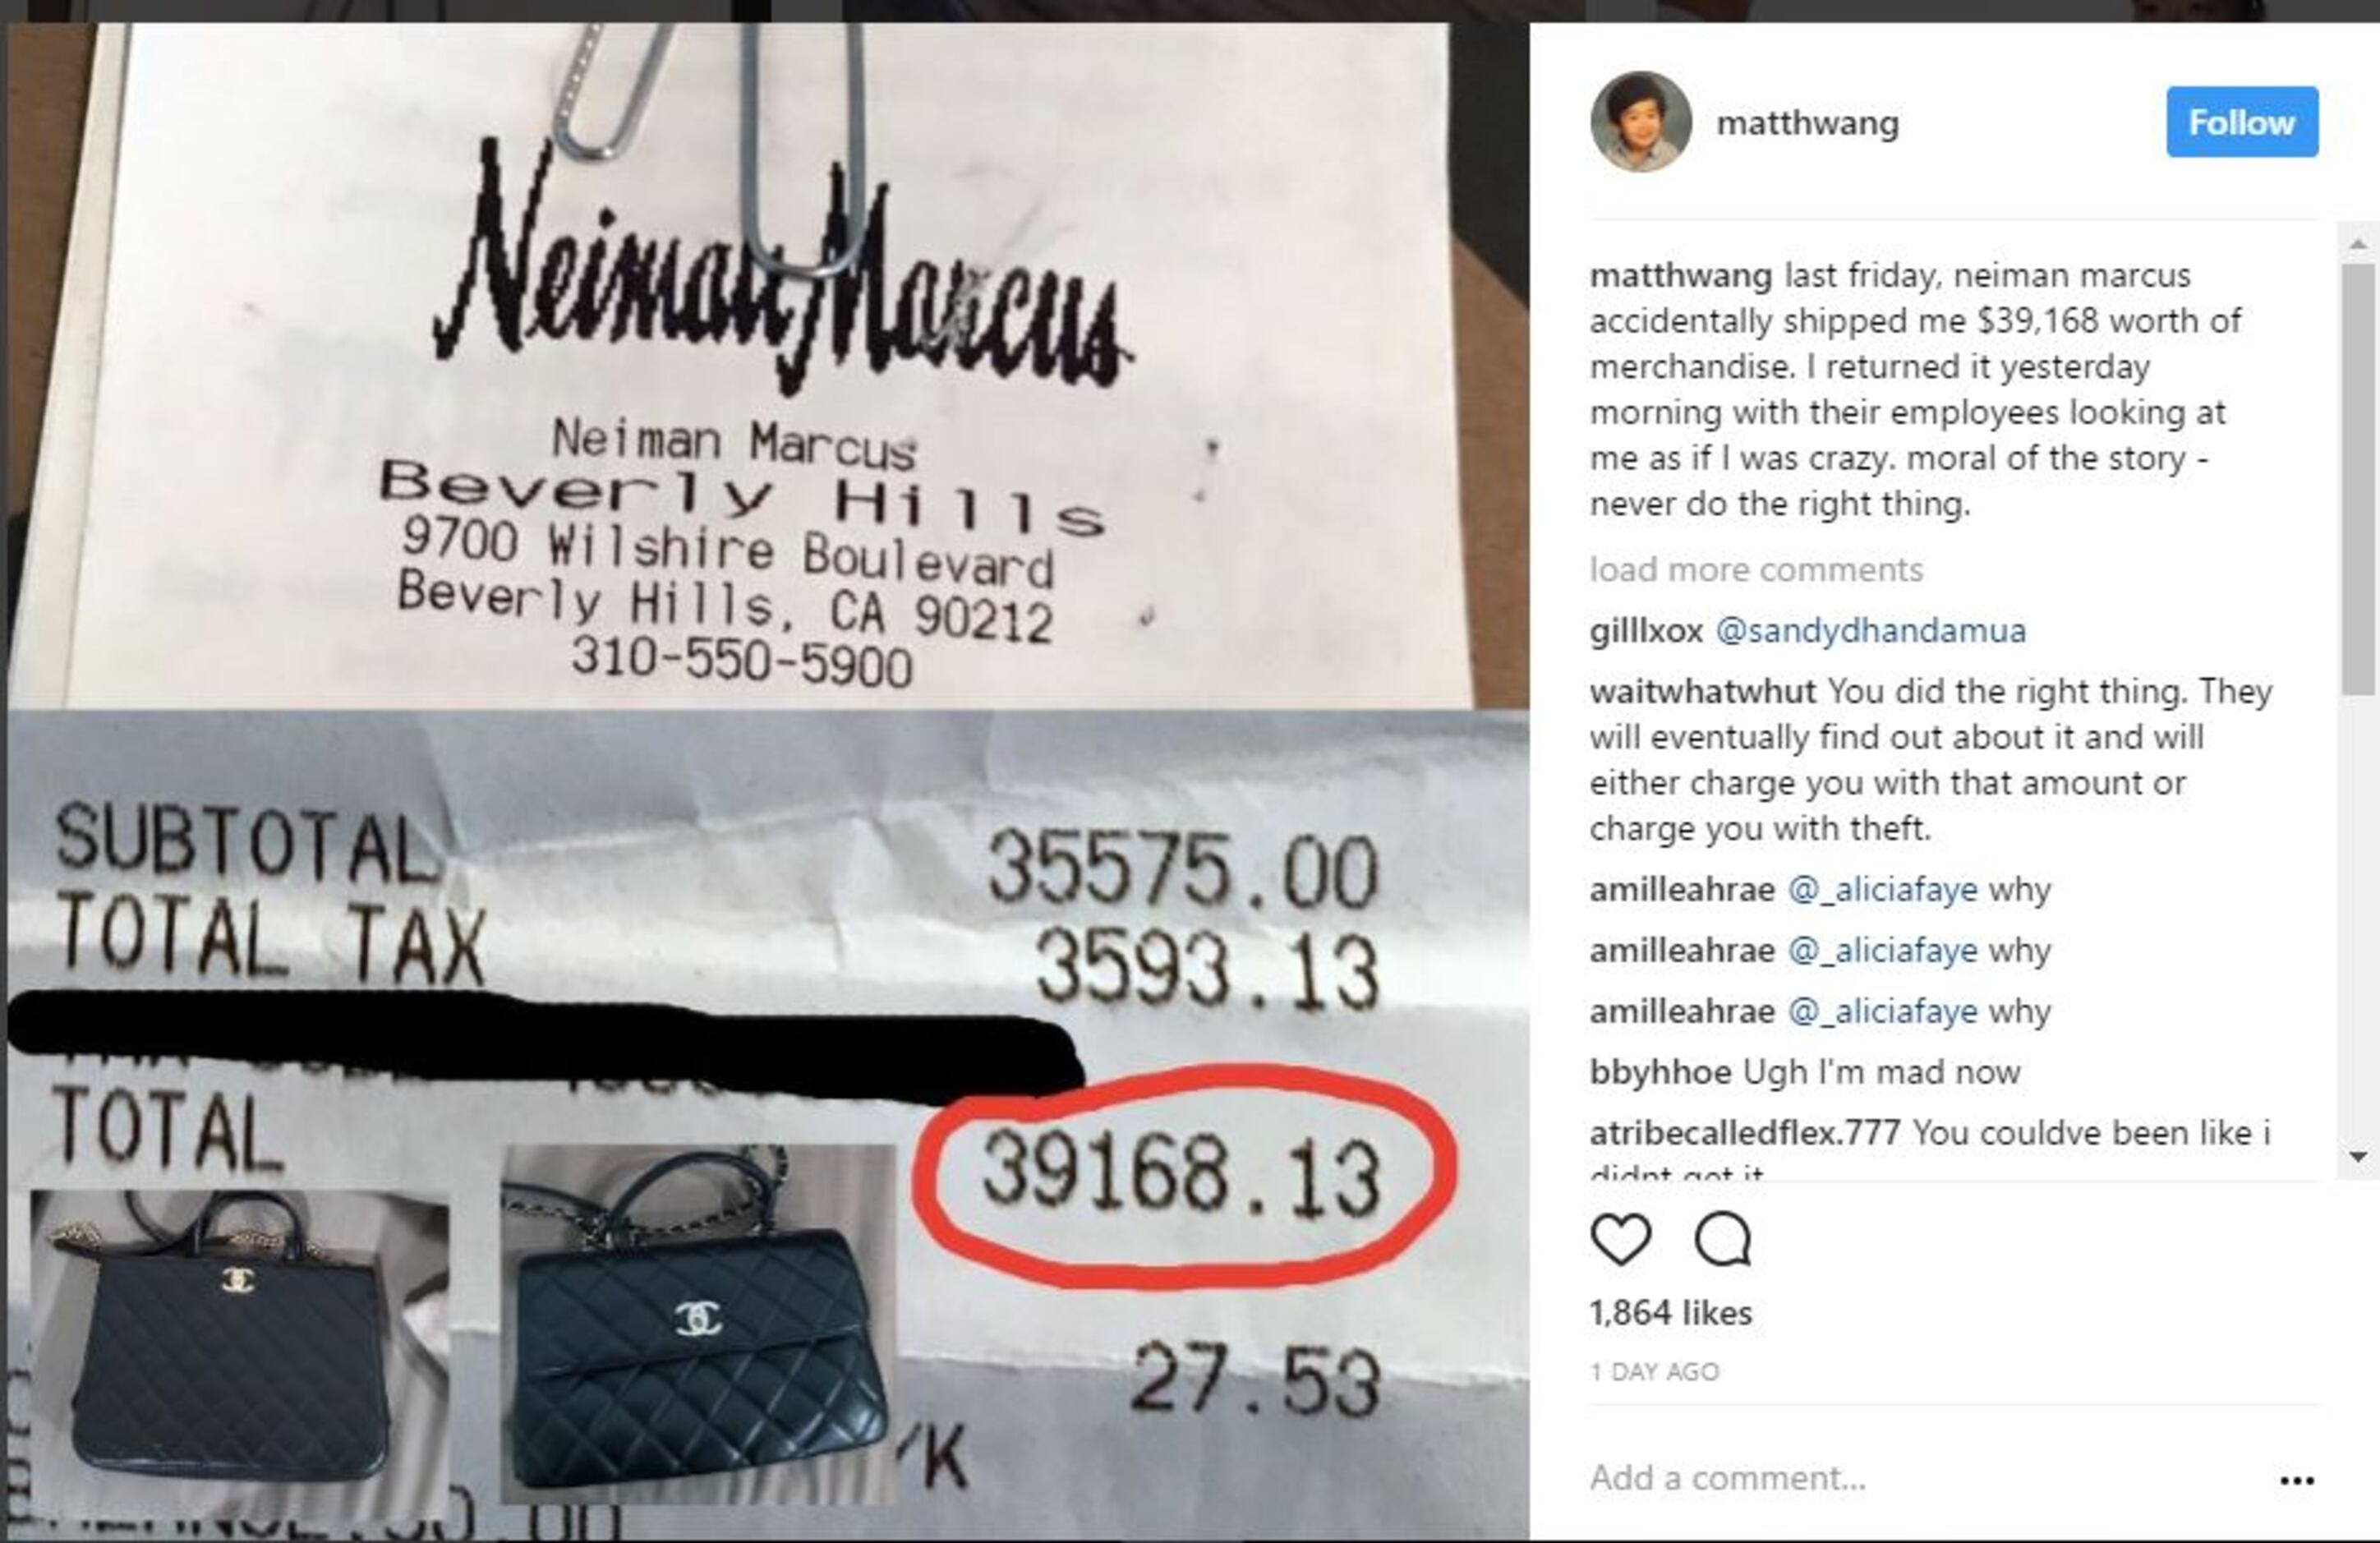 If Neiman Marcus shipped you $40,000 worth of handbags by